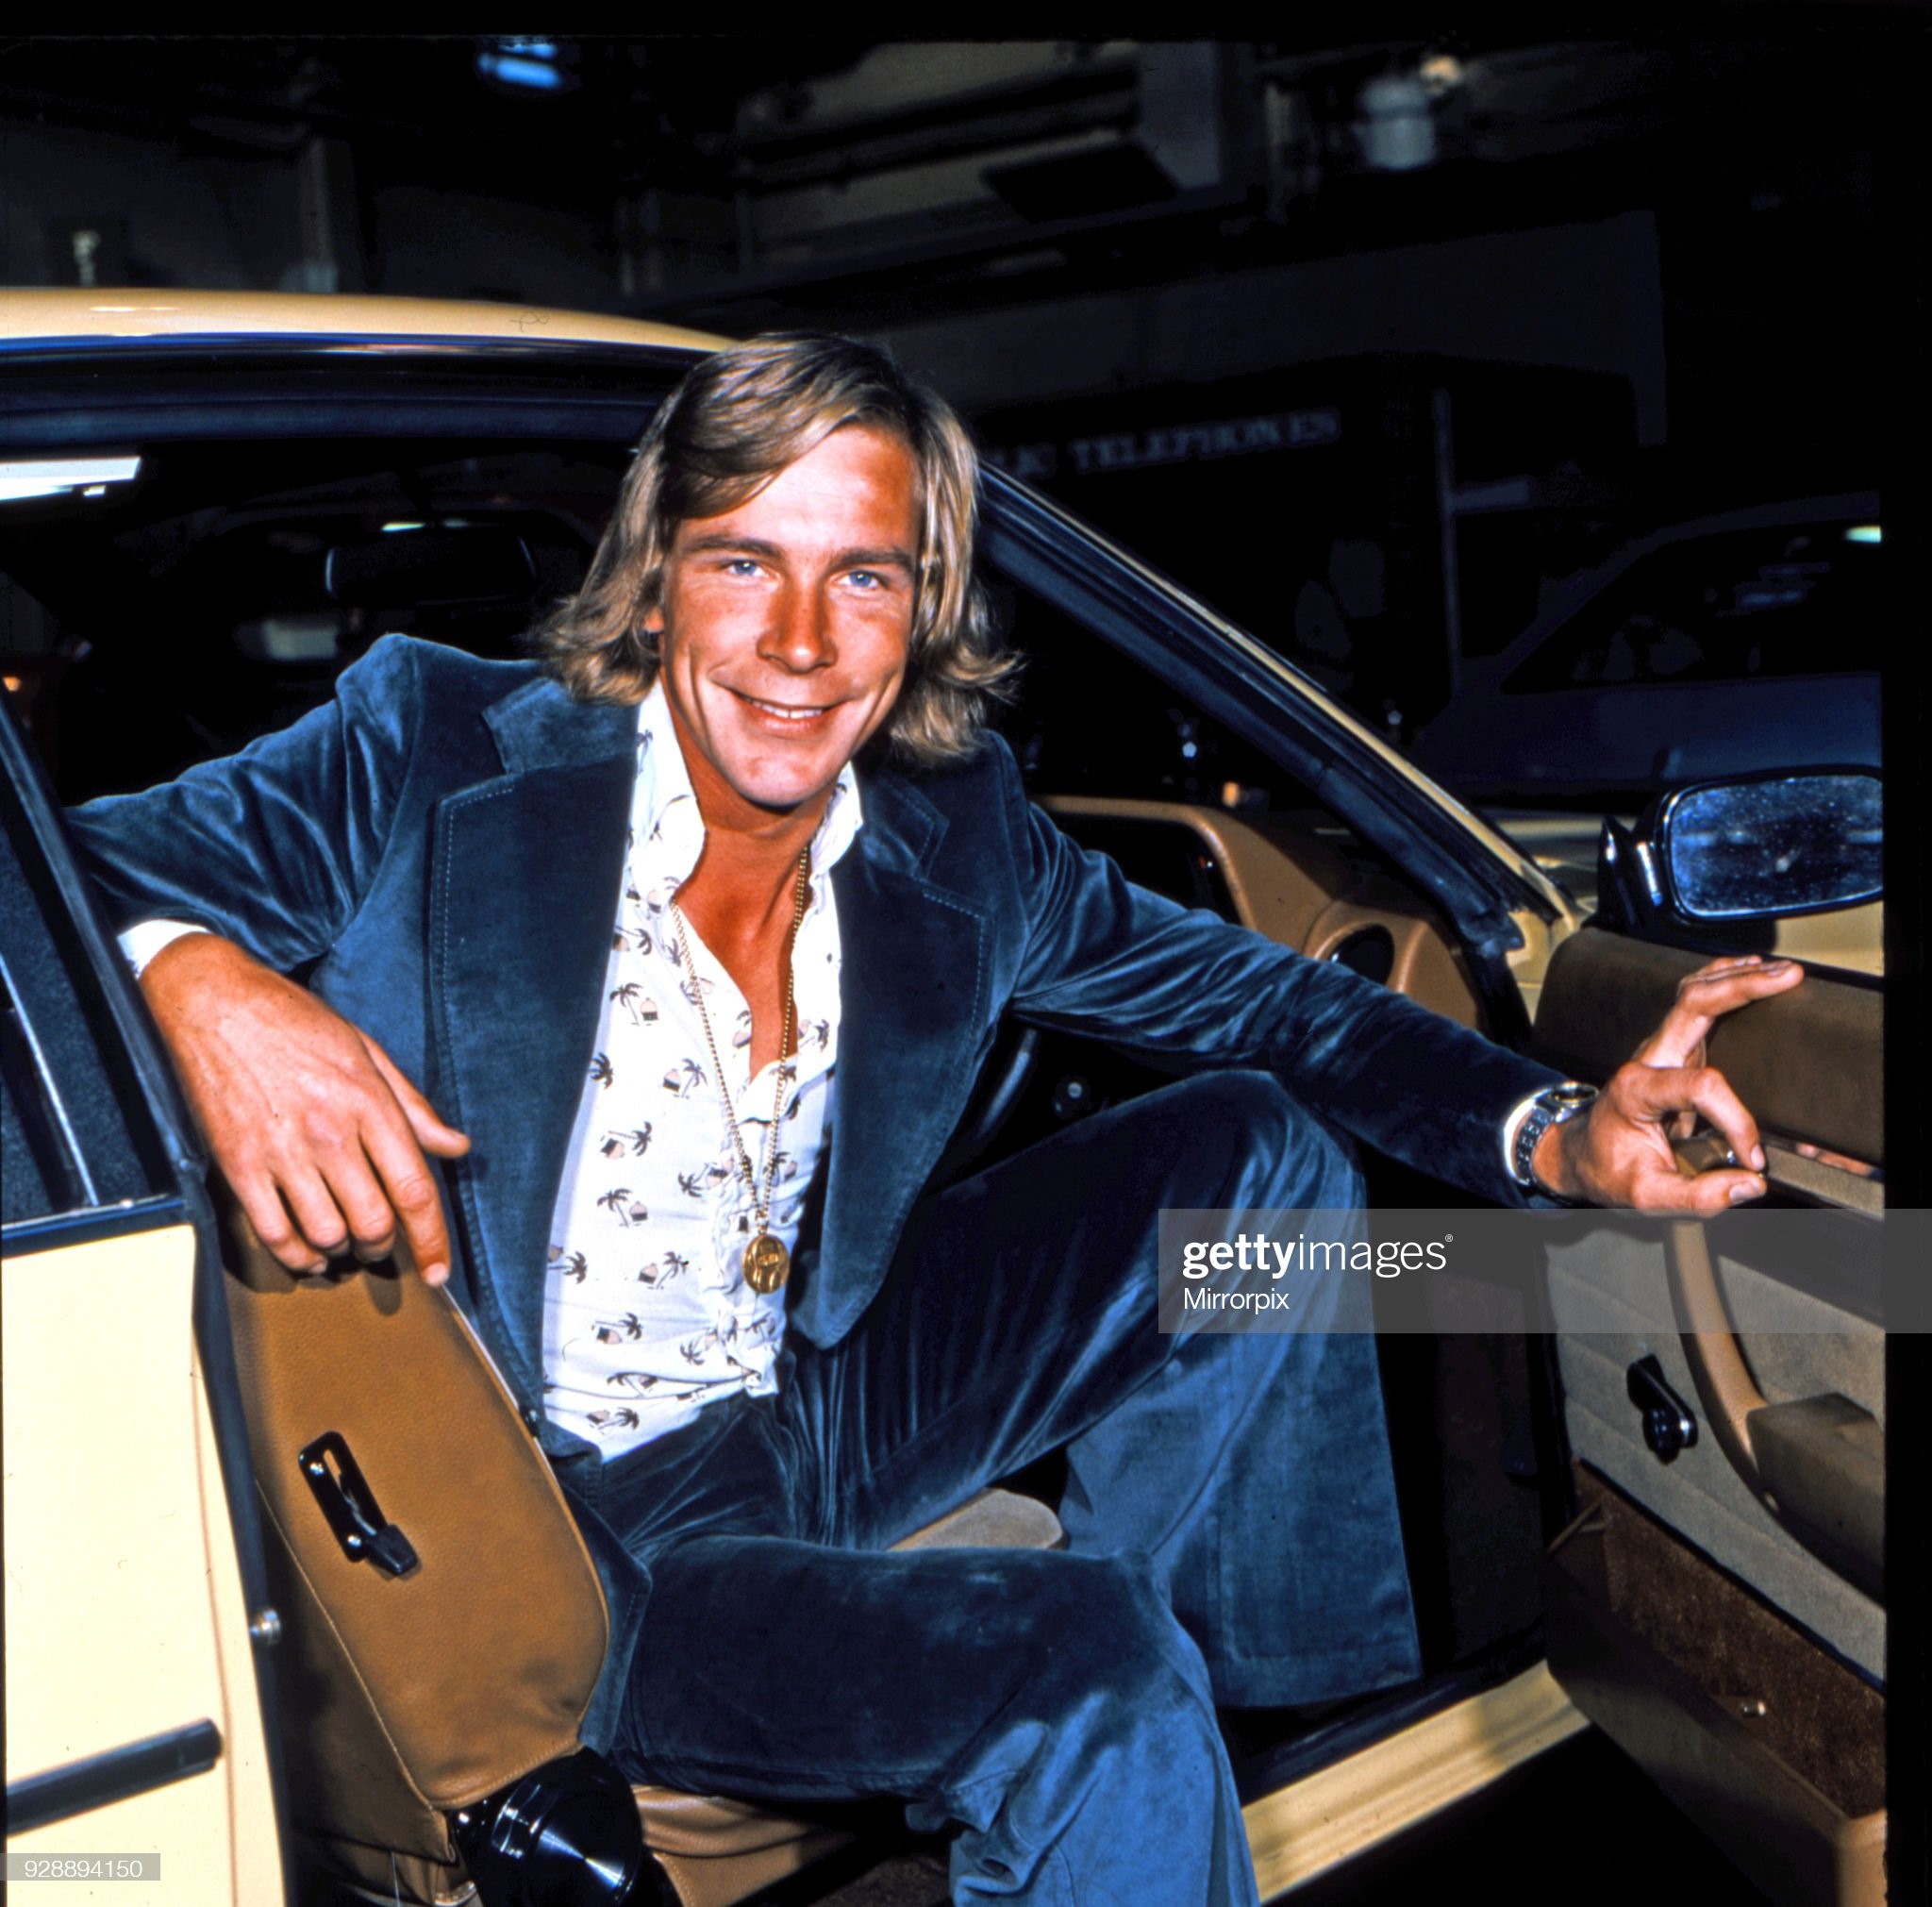 James Hunt, smiles to camera, whilst sitting in the front seat of his car in May 1978. James is wearing a medallion, white patterned shirt and blue velvet suit.